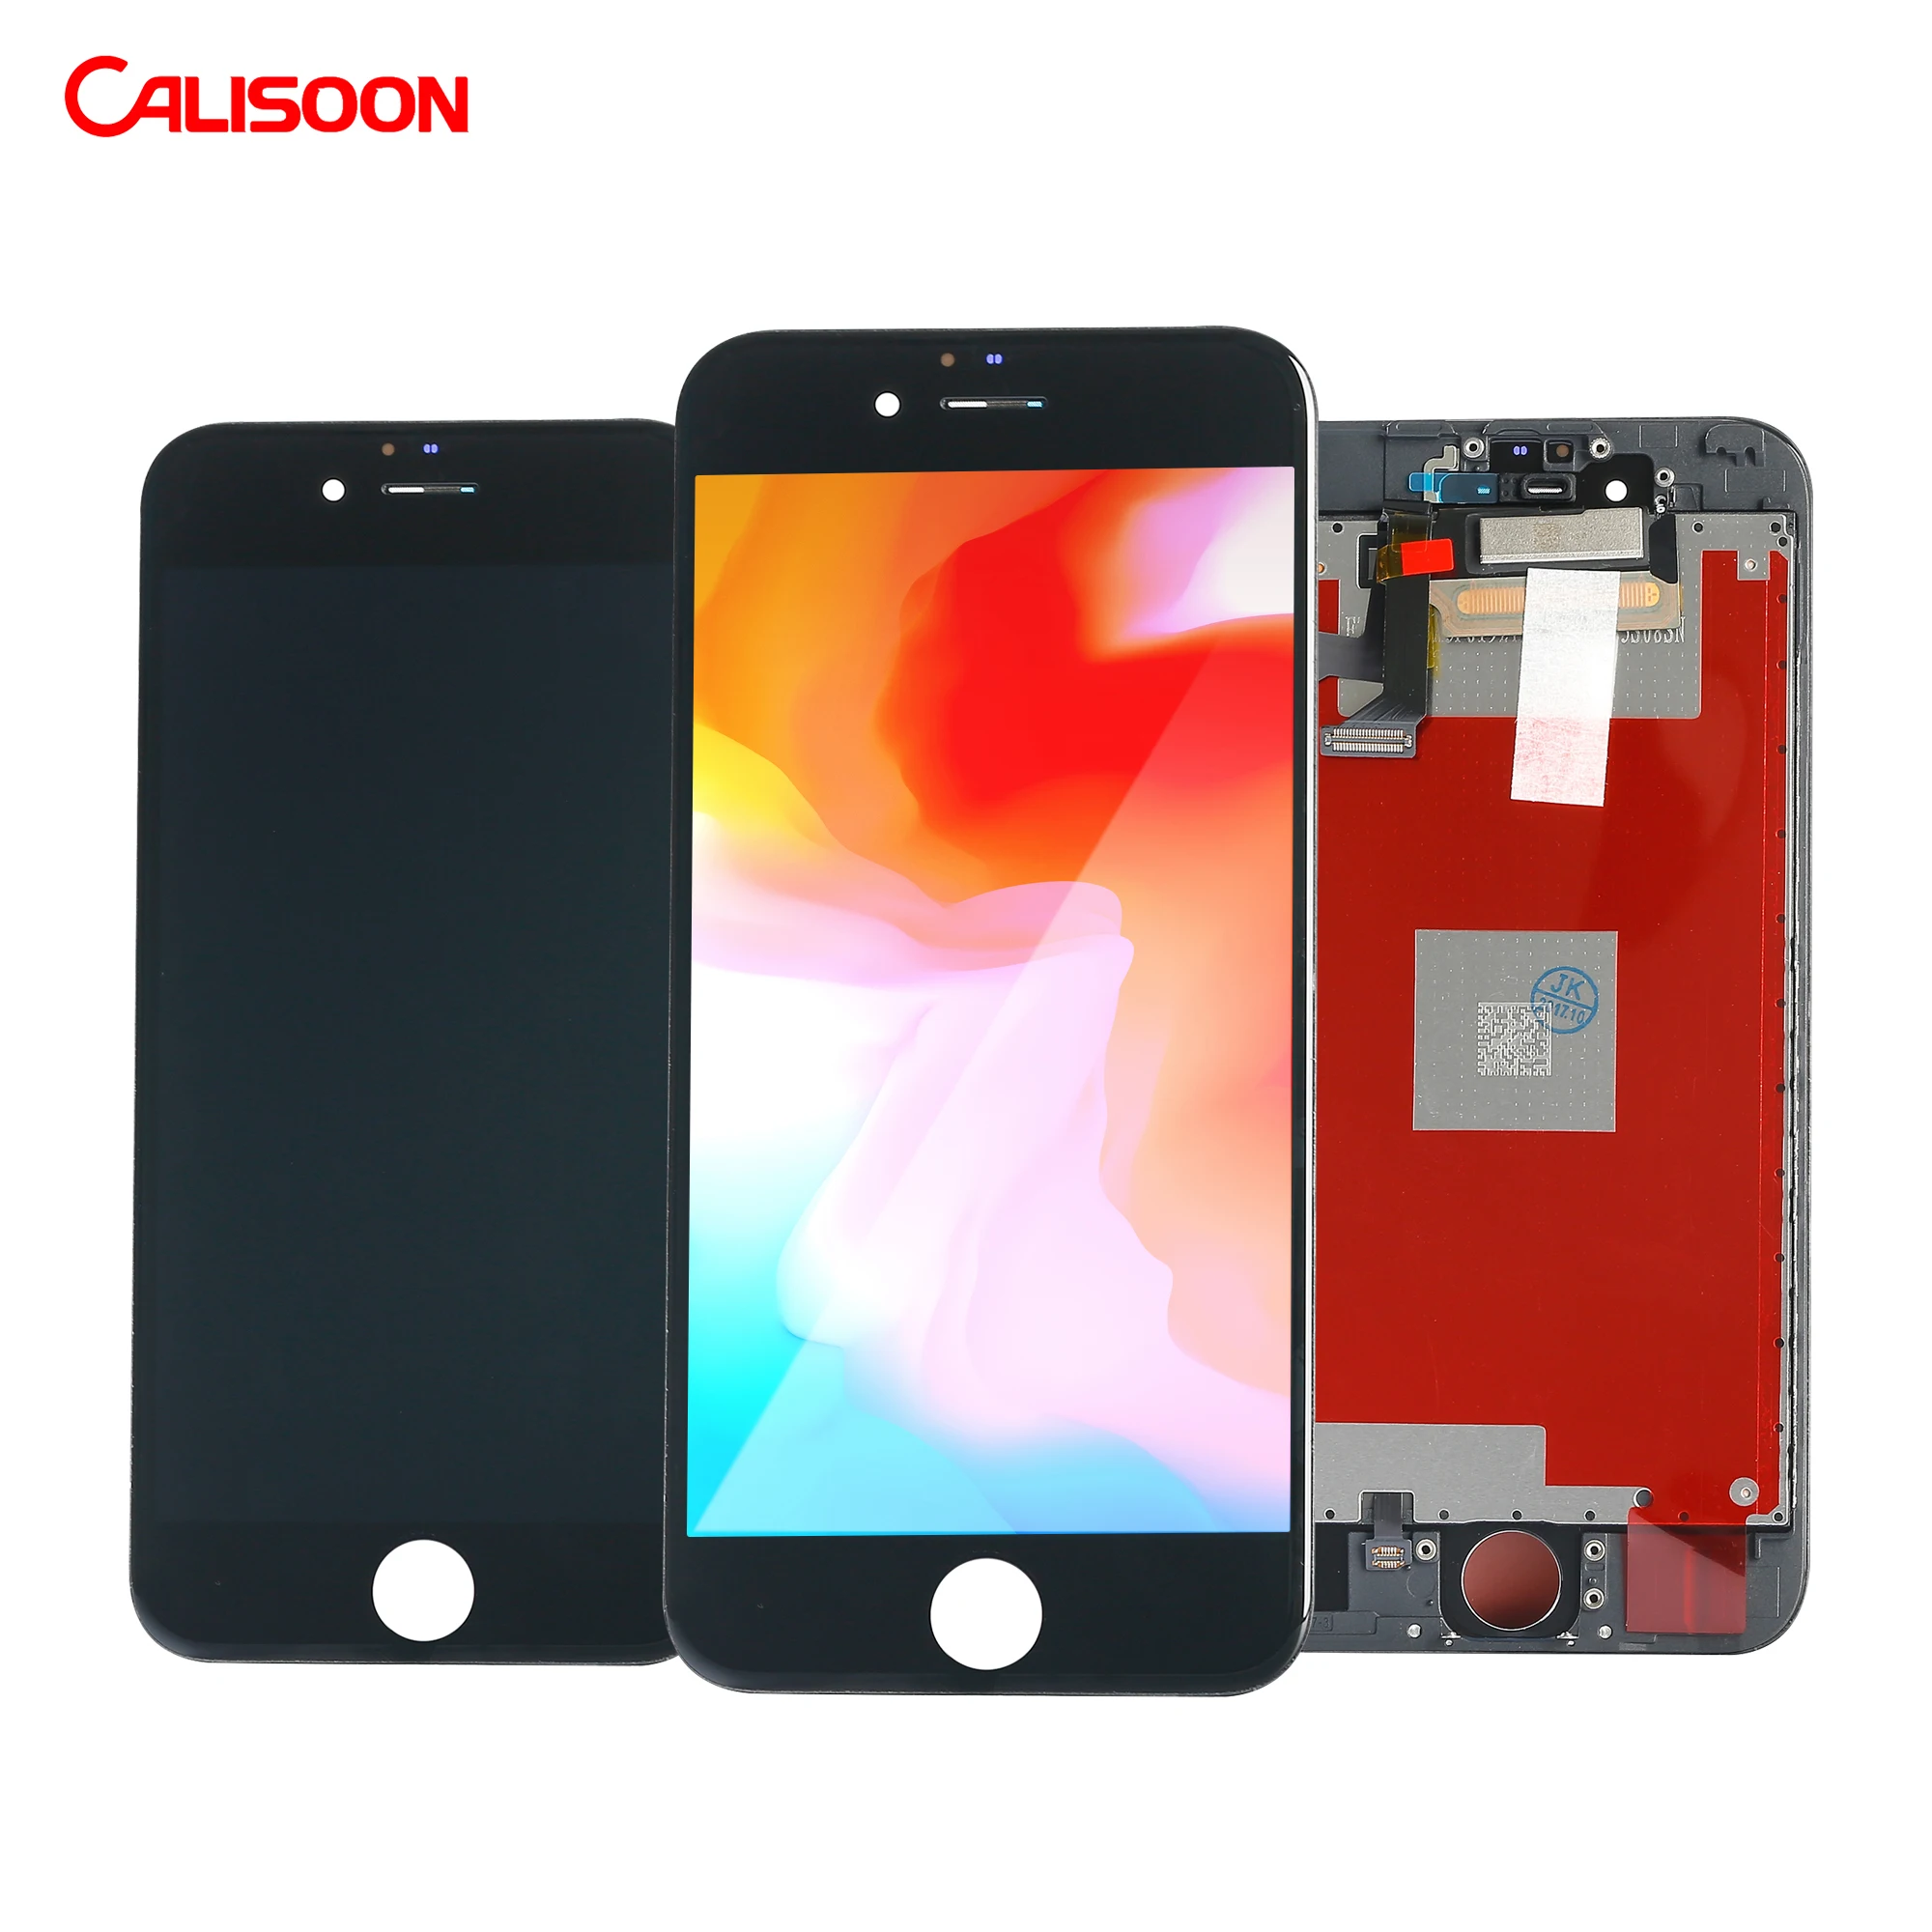 

Hot sale repair mobile phone lcd parts refurbished lcd for iphone6s lcd touch screen